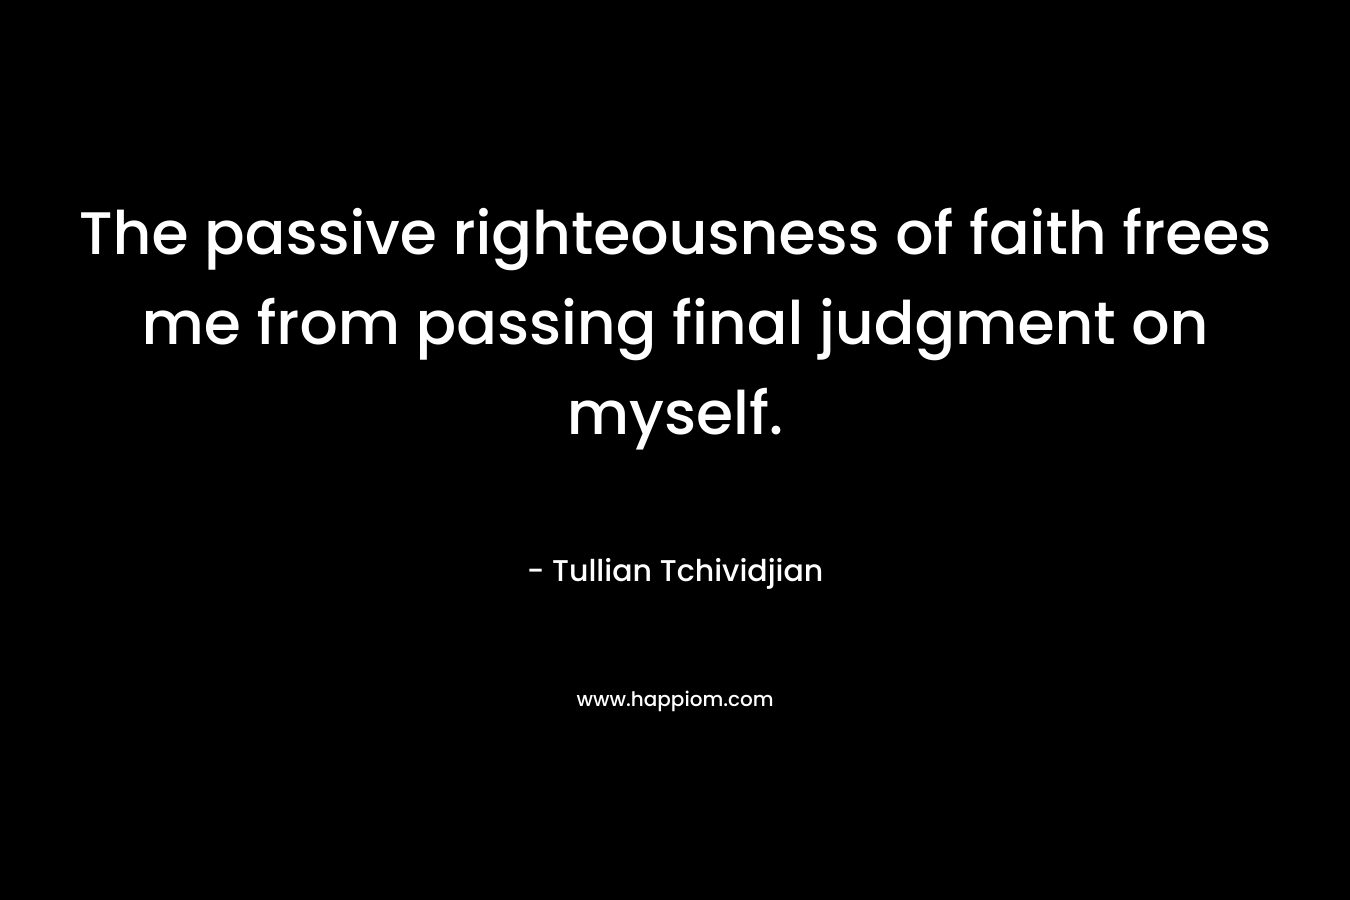 The passive righteousness of faith frees me from passing final judgment on myself. – Tullian Tchividjian